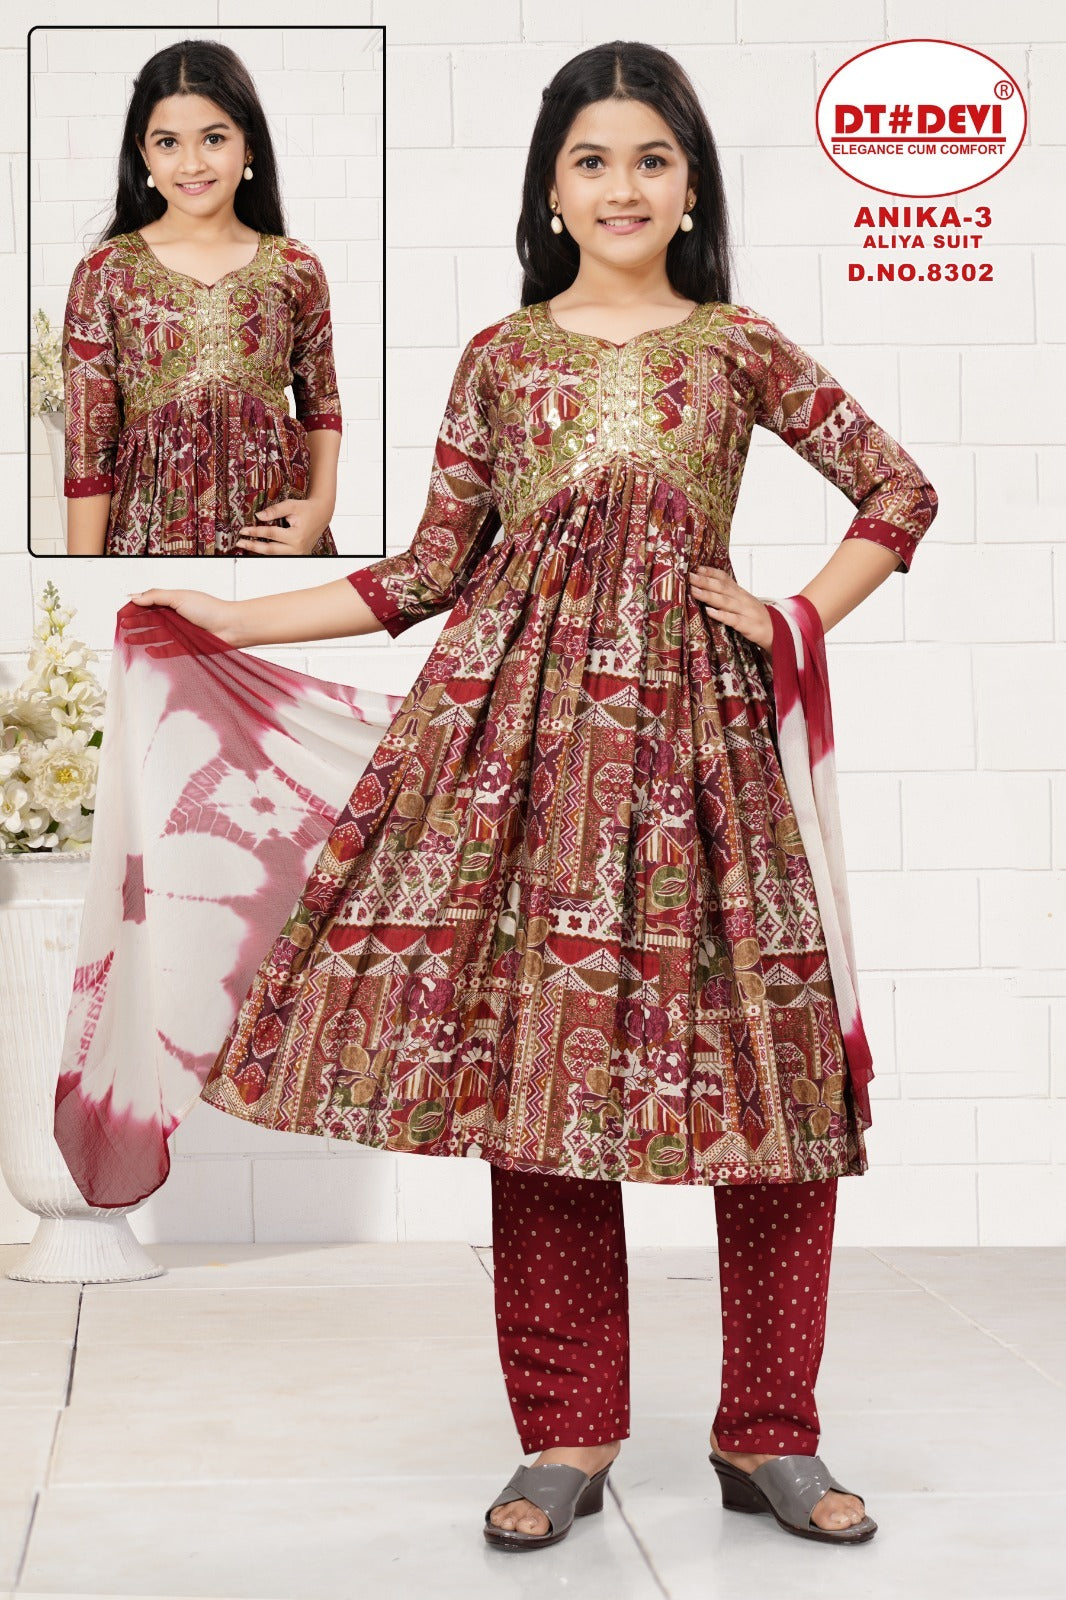 Anika Vol 3-8302 Dt Devi Modal Girls Readymade Pant Suits